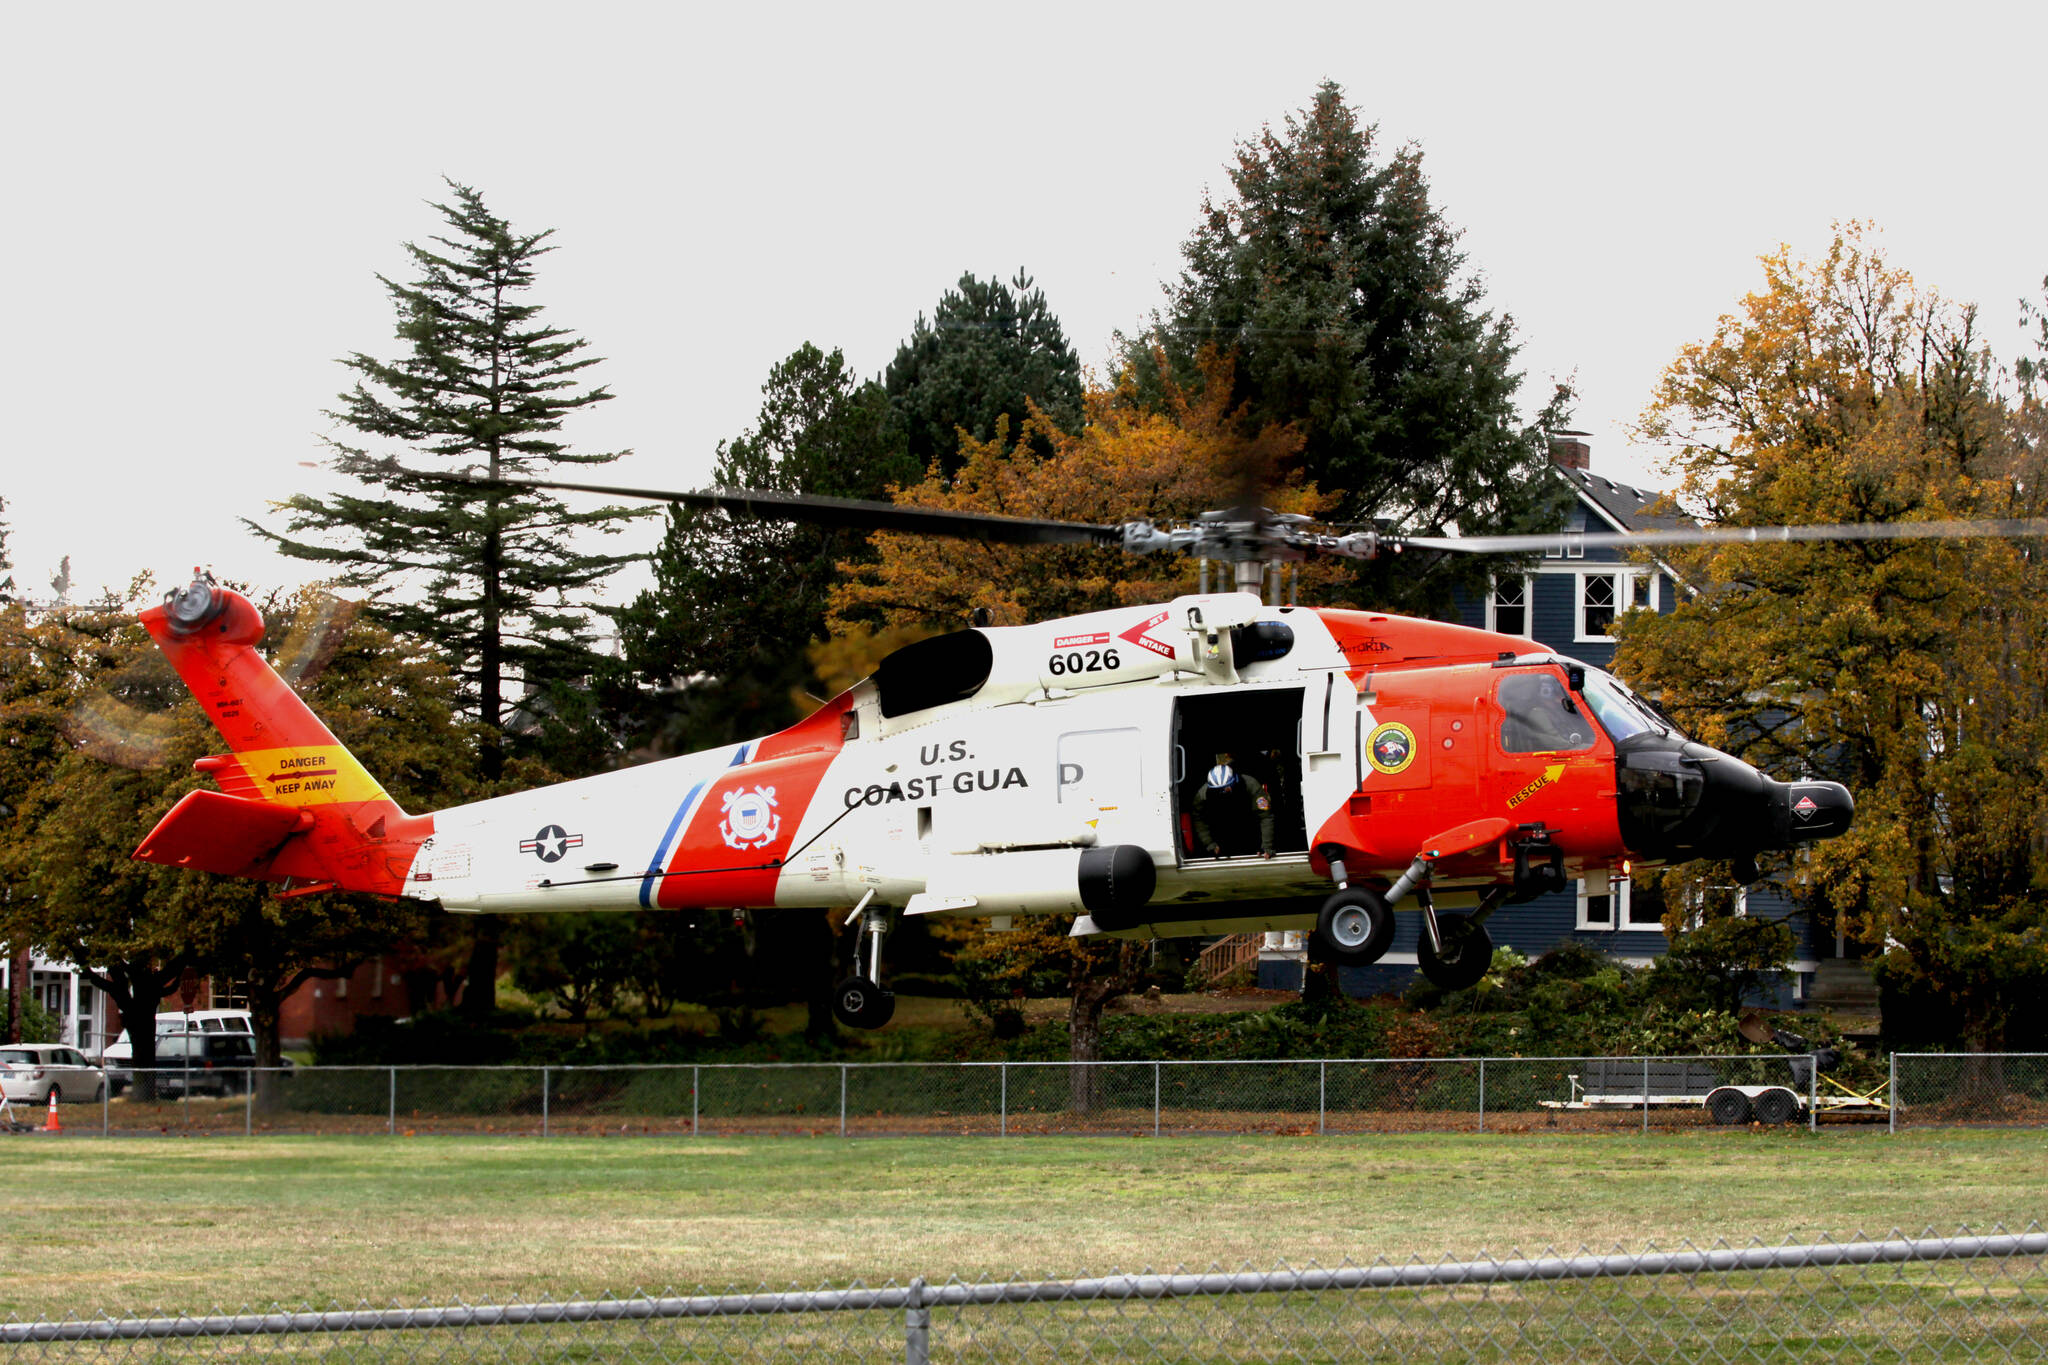 Michael S. Lockett / The Daily World 
An MH-60 Jayhawk from Coast Guard Air Station Astoria that visited Aberdeen as part of a Veterans Day ceremony lands in a field near St. Mary School on Nov. 10.